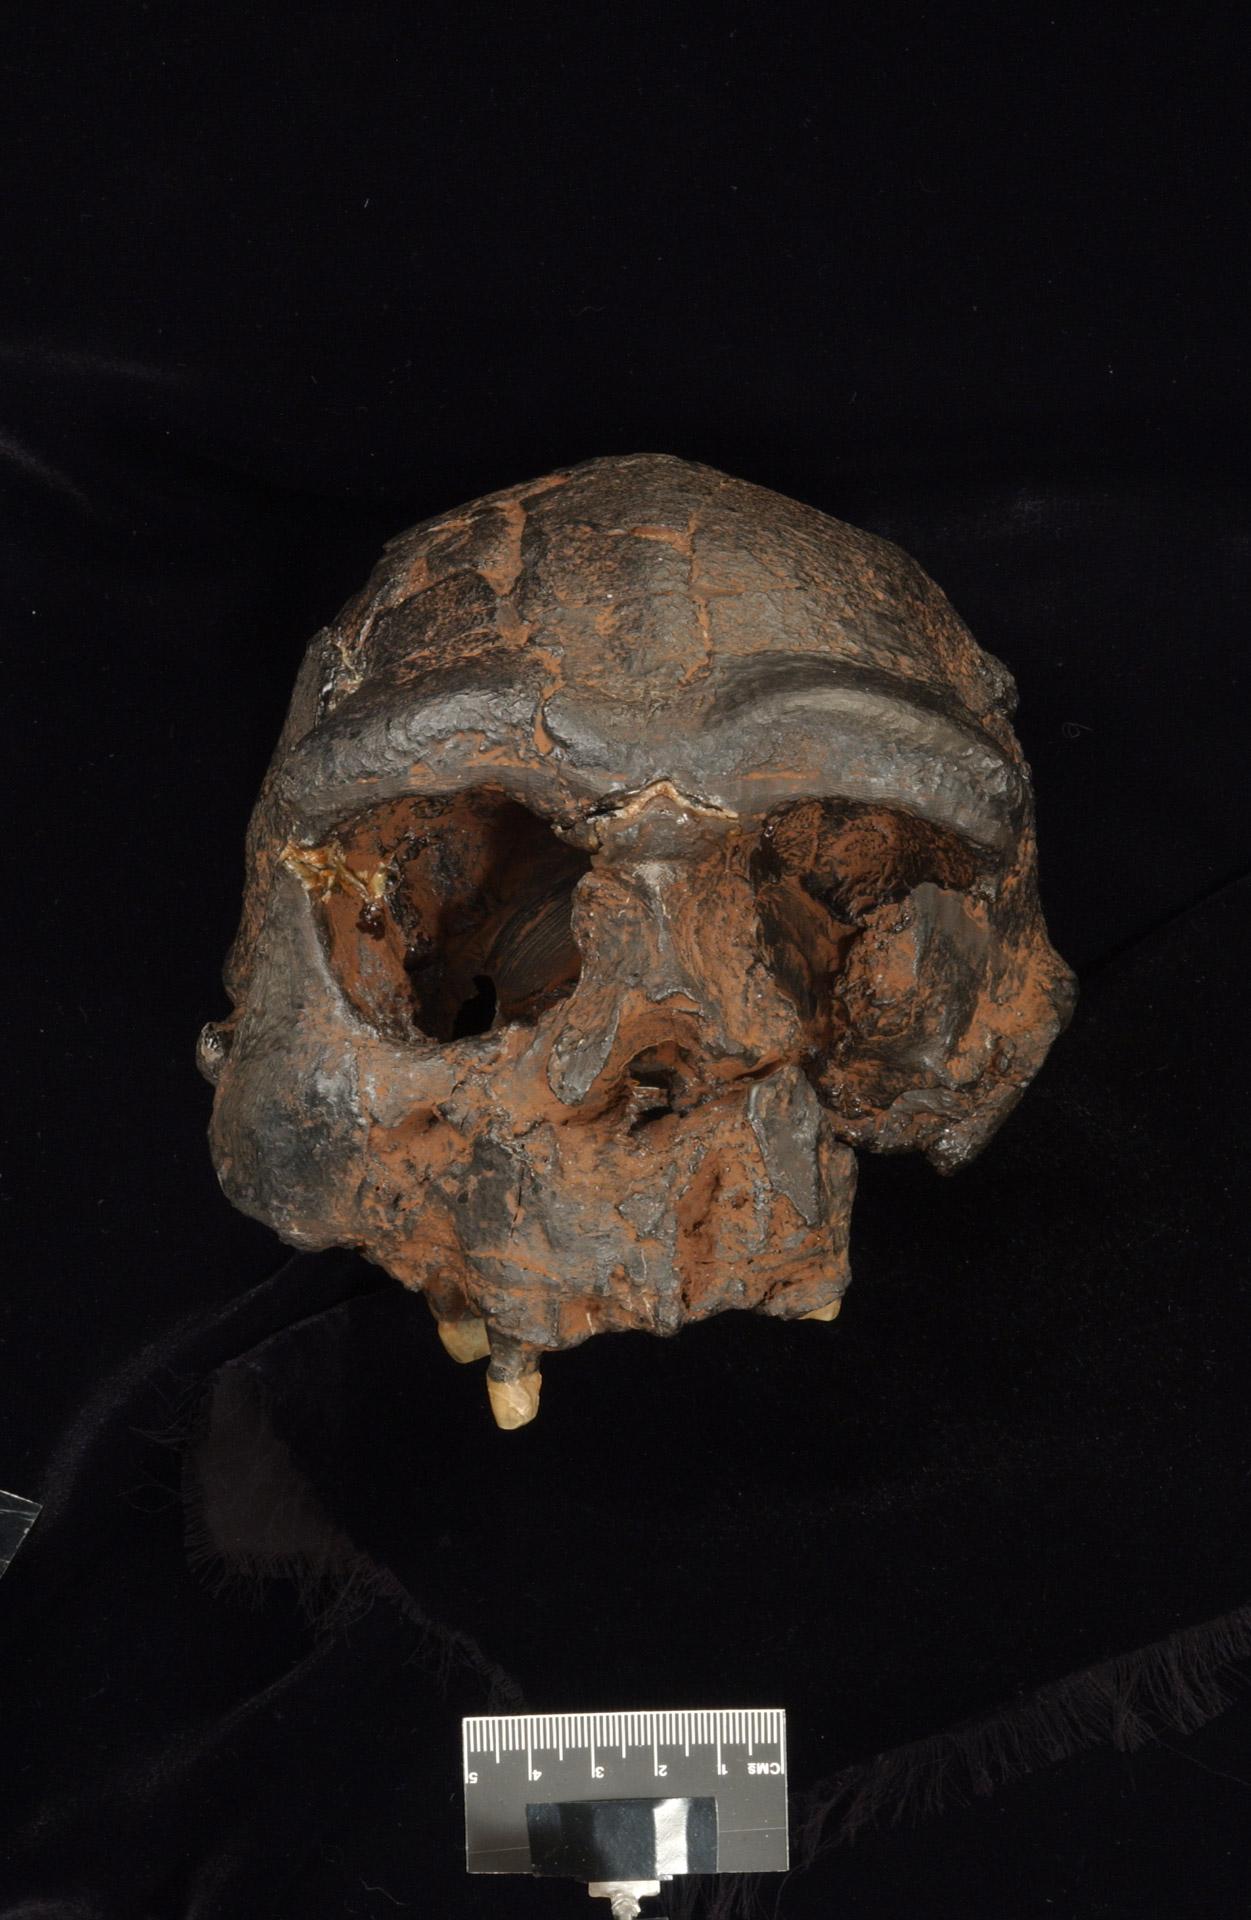 Replica of the Sangiran 17 Homo erectus cranium from Java - frontal view. Photo supplied by the Trustees of the Natural History Museum